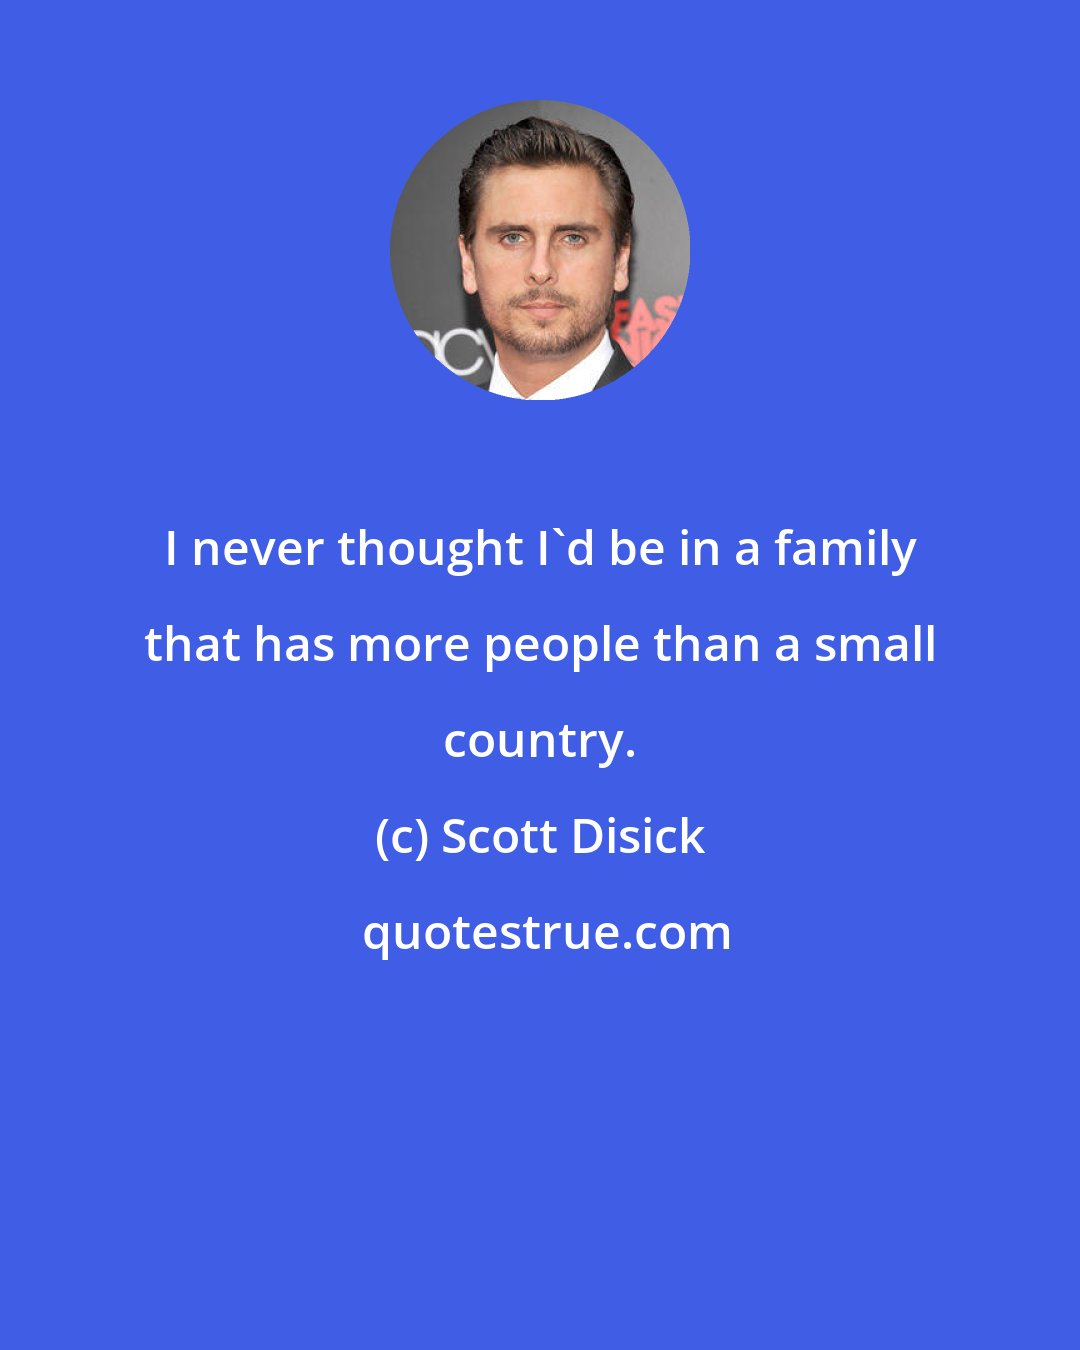 Scott Disick: I never thought I'd be in a family that has more people than a small country.